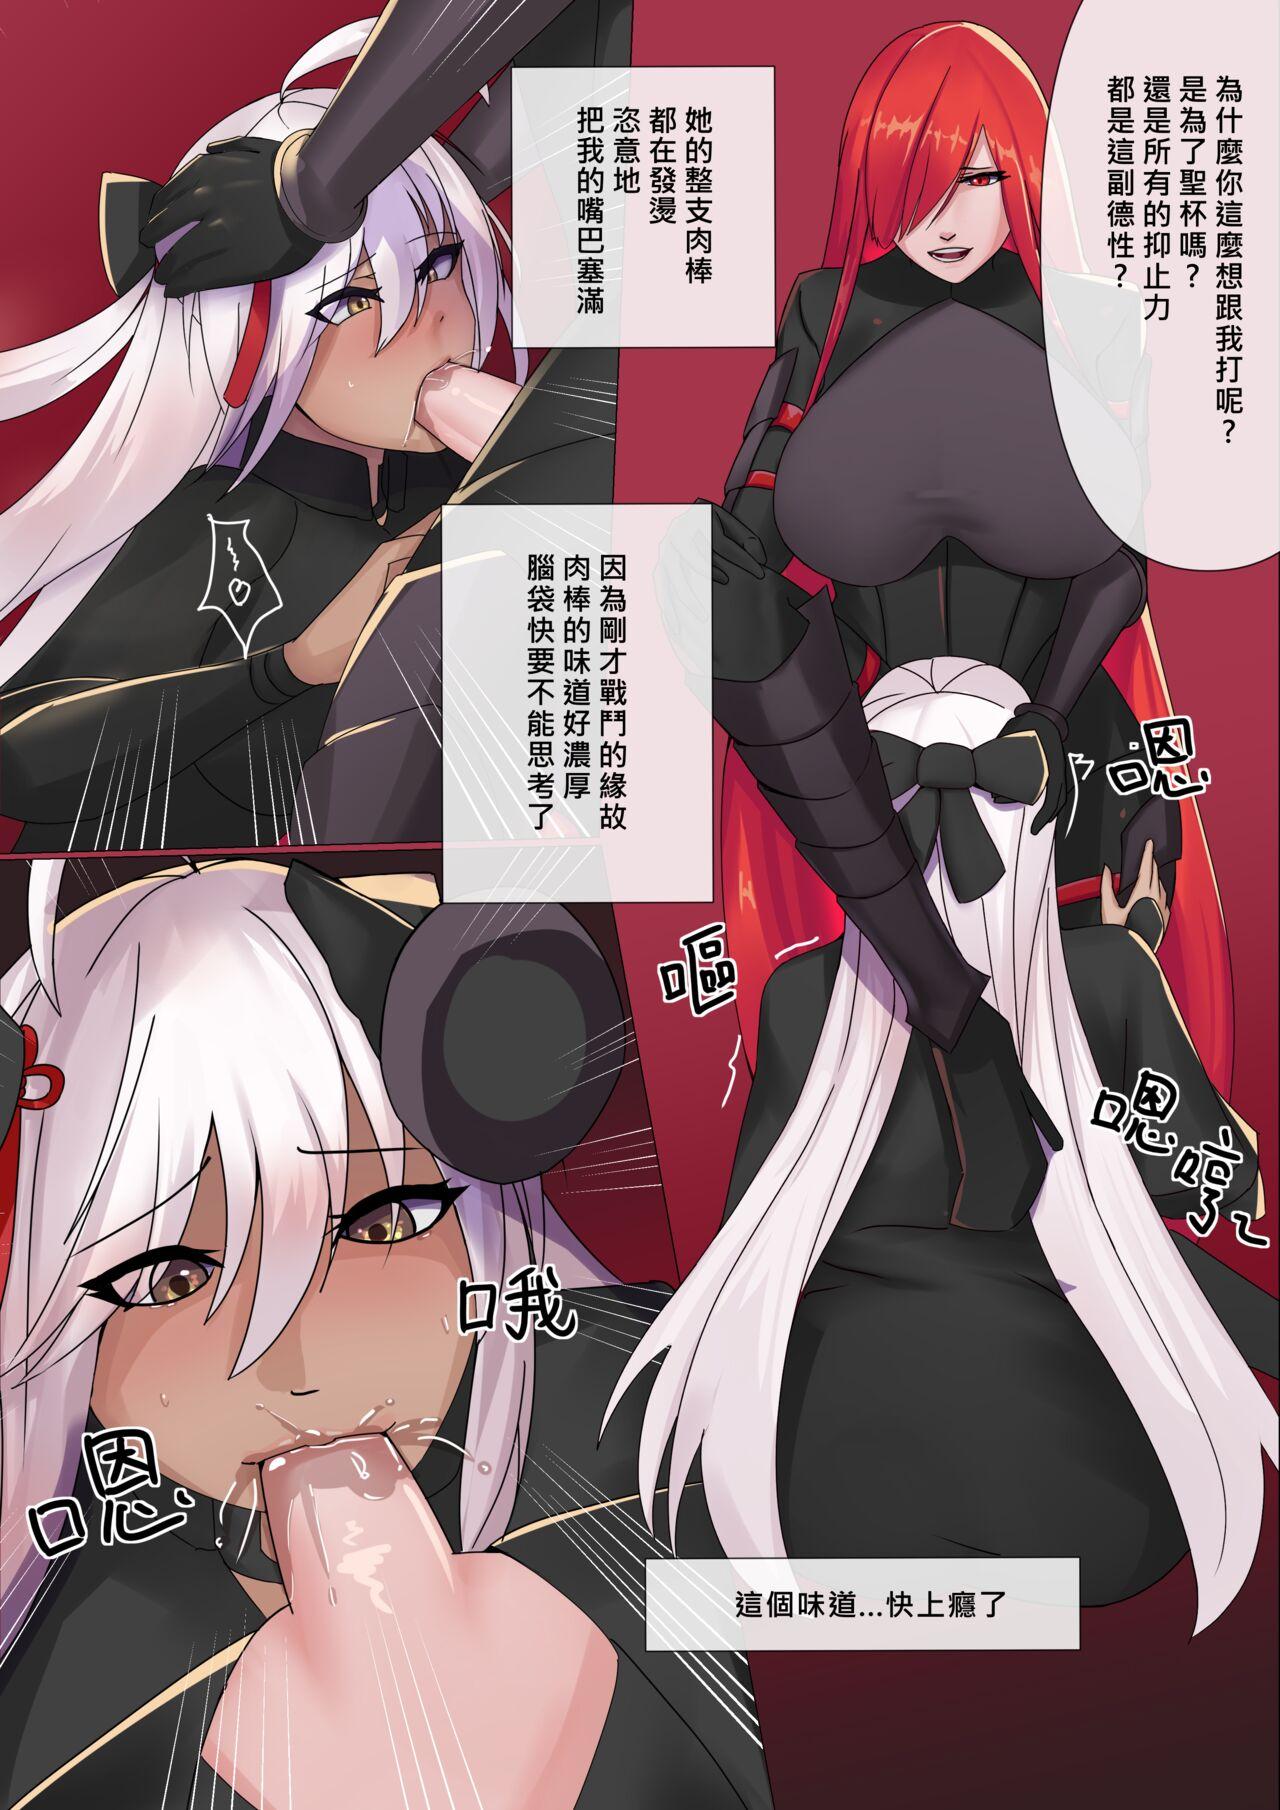 Whore 魔王美好的懲罰 - Fate grand order Defloration - Page 4